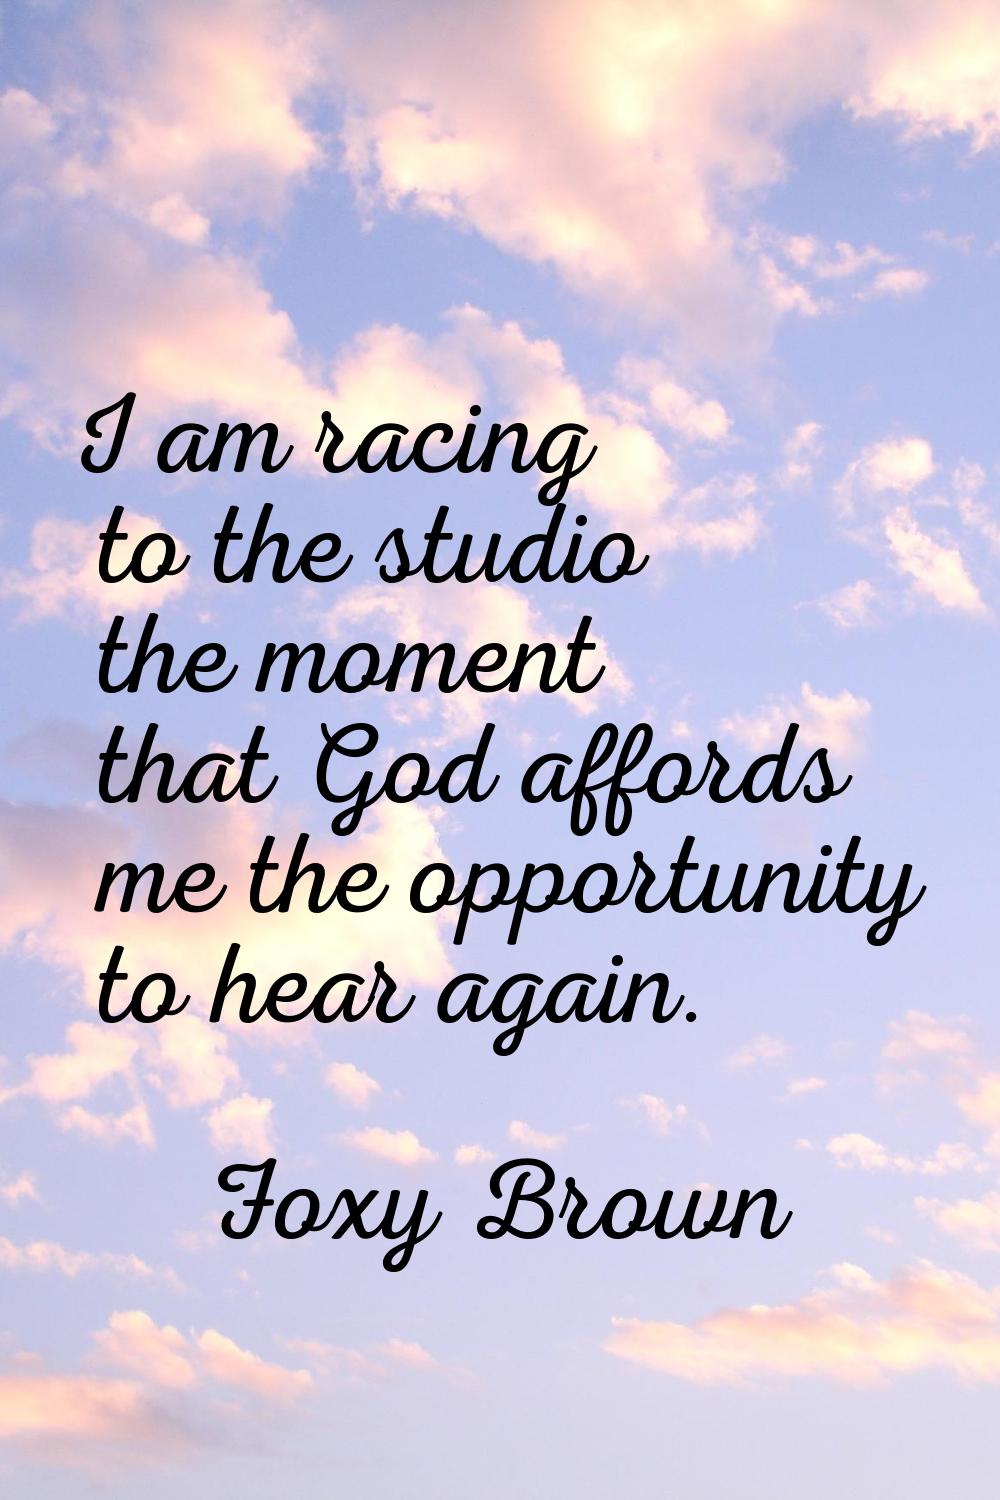 I am racing to the studio the moment that God affords me the opportunity to hear again.